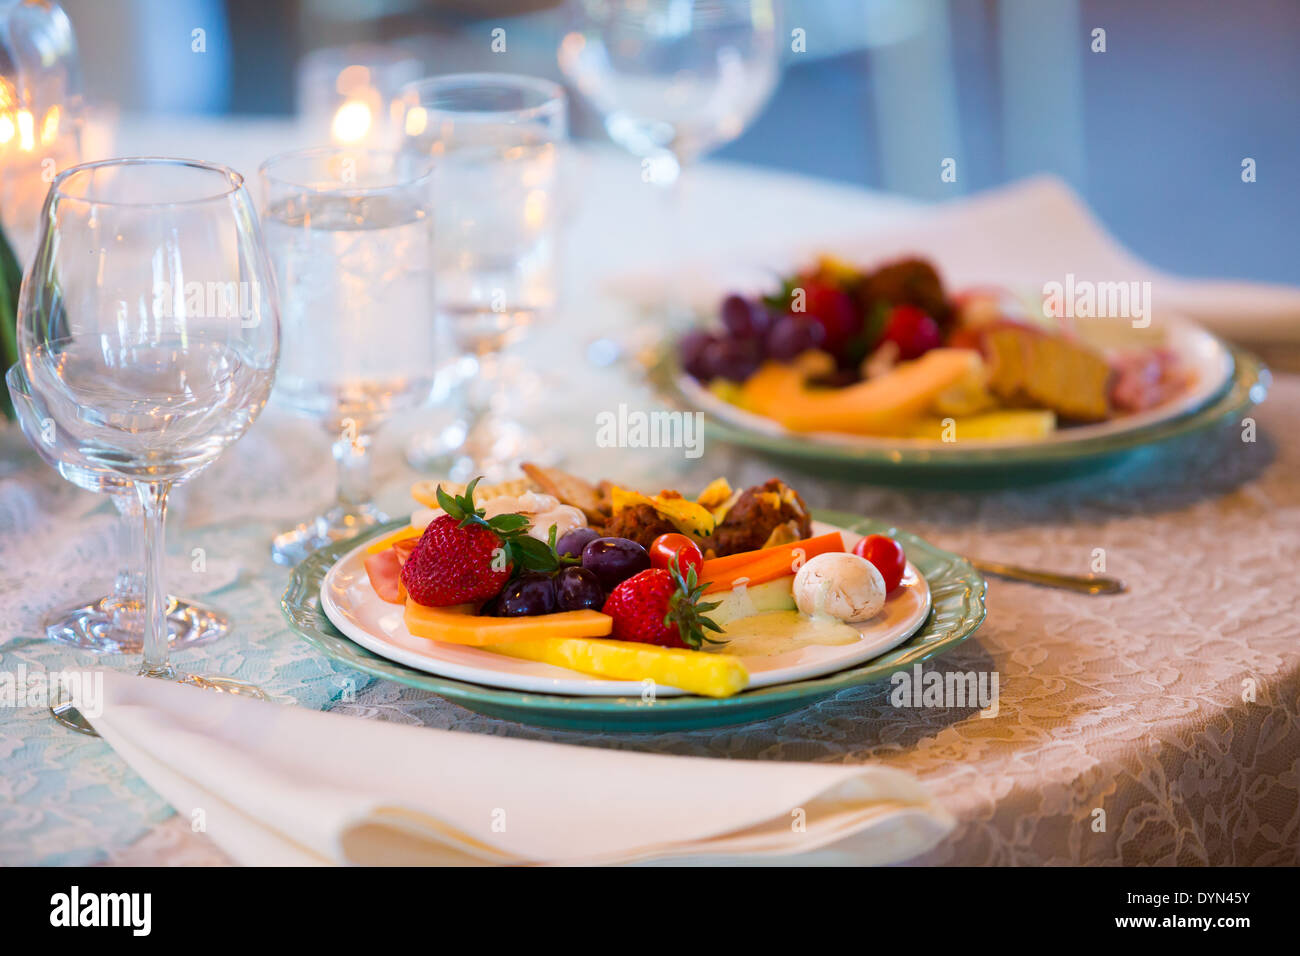 Wedding food at the reception includes dinner on a plate at a table. Stock Photo